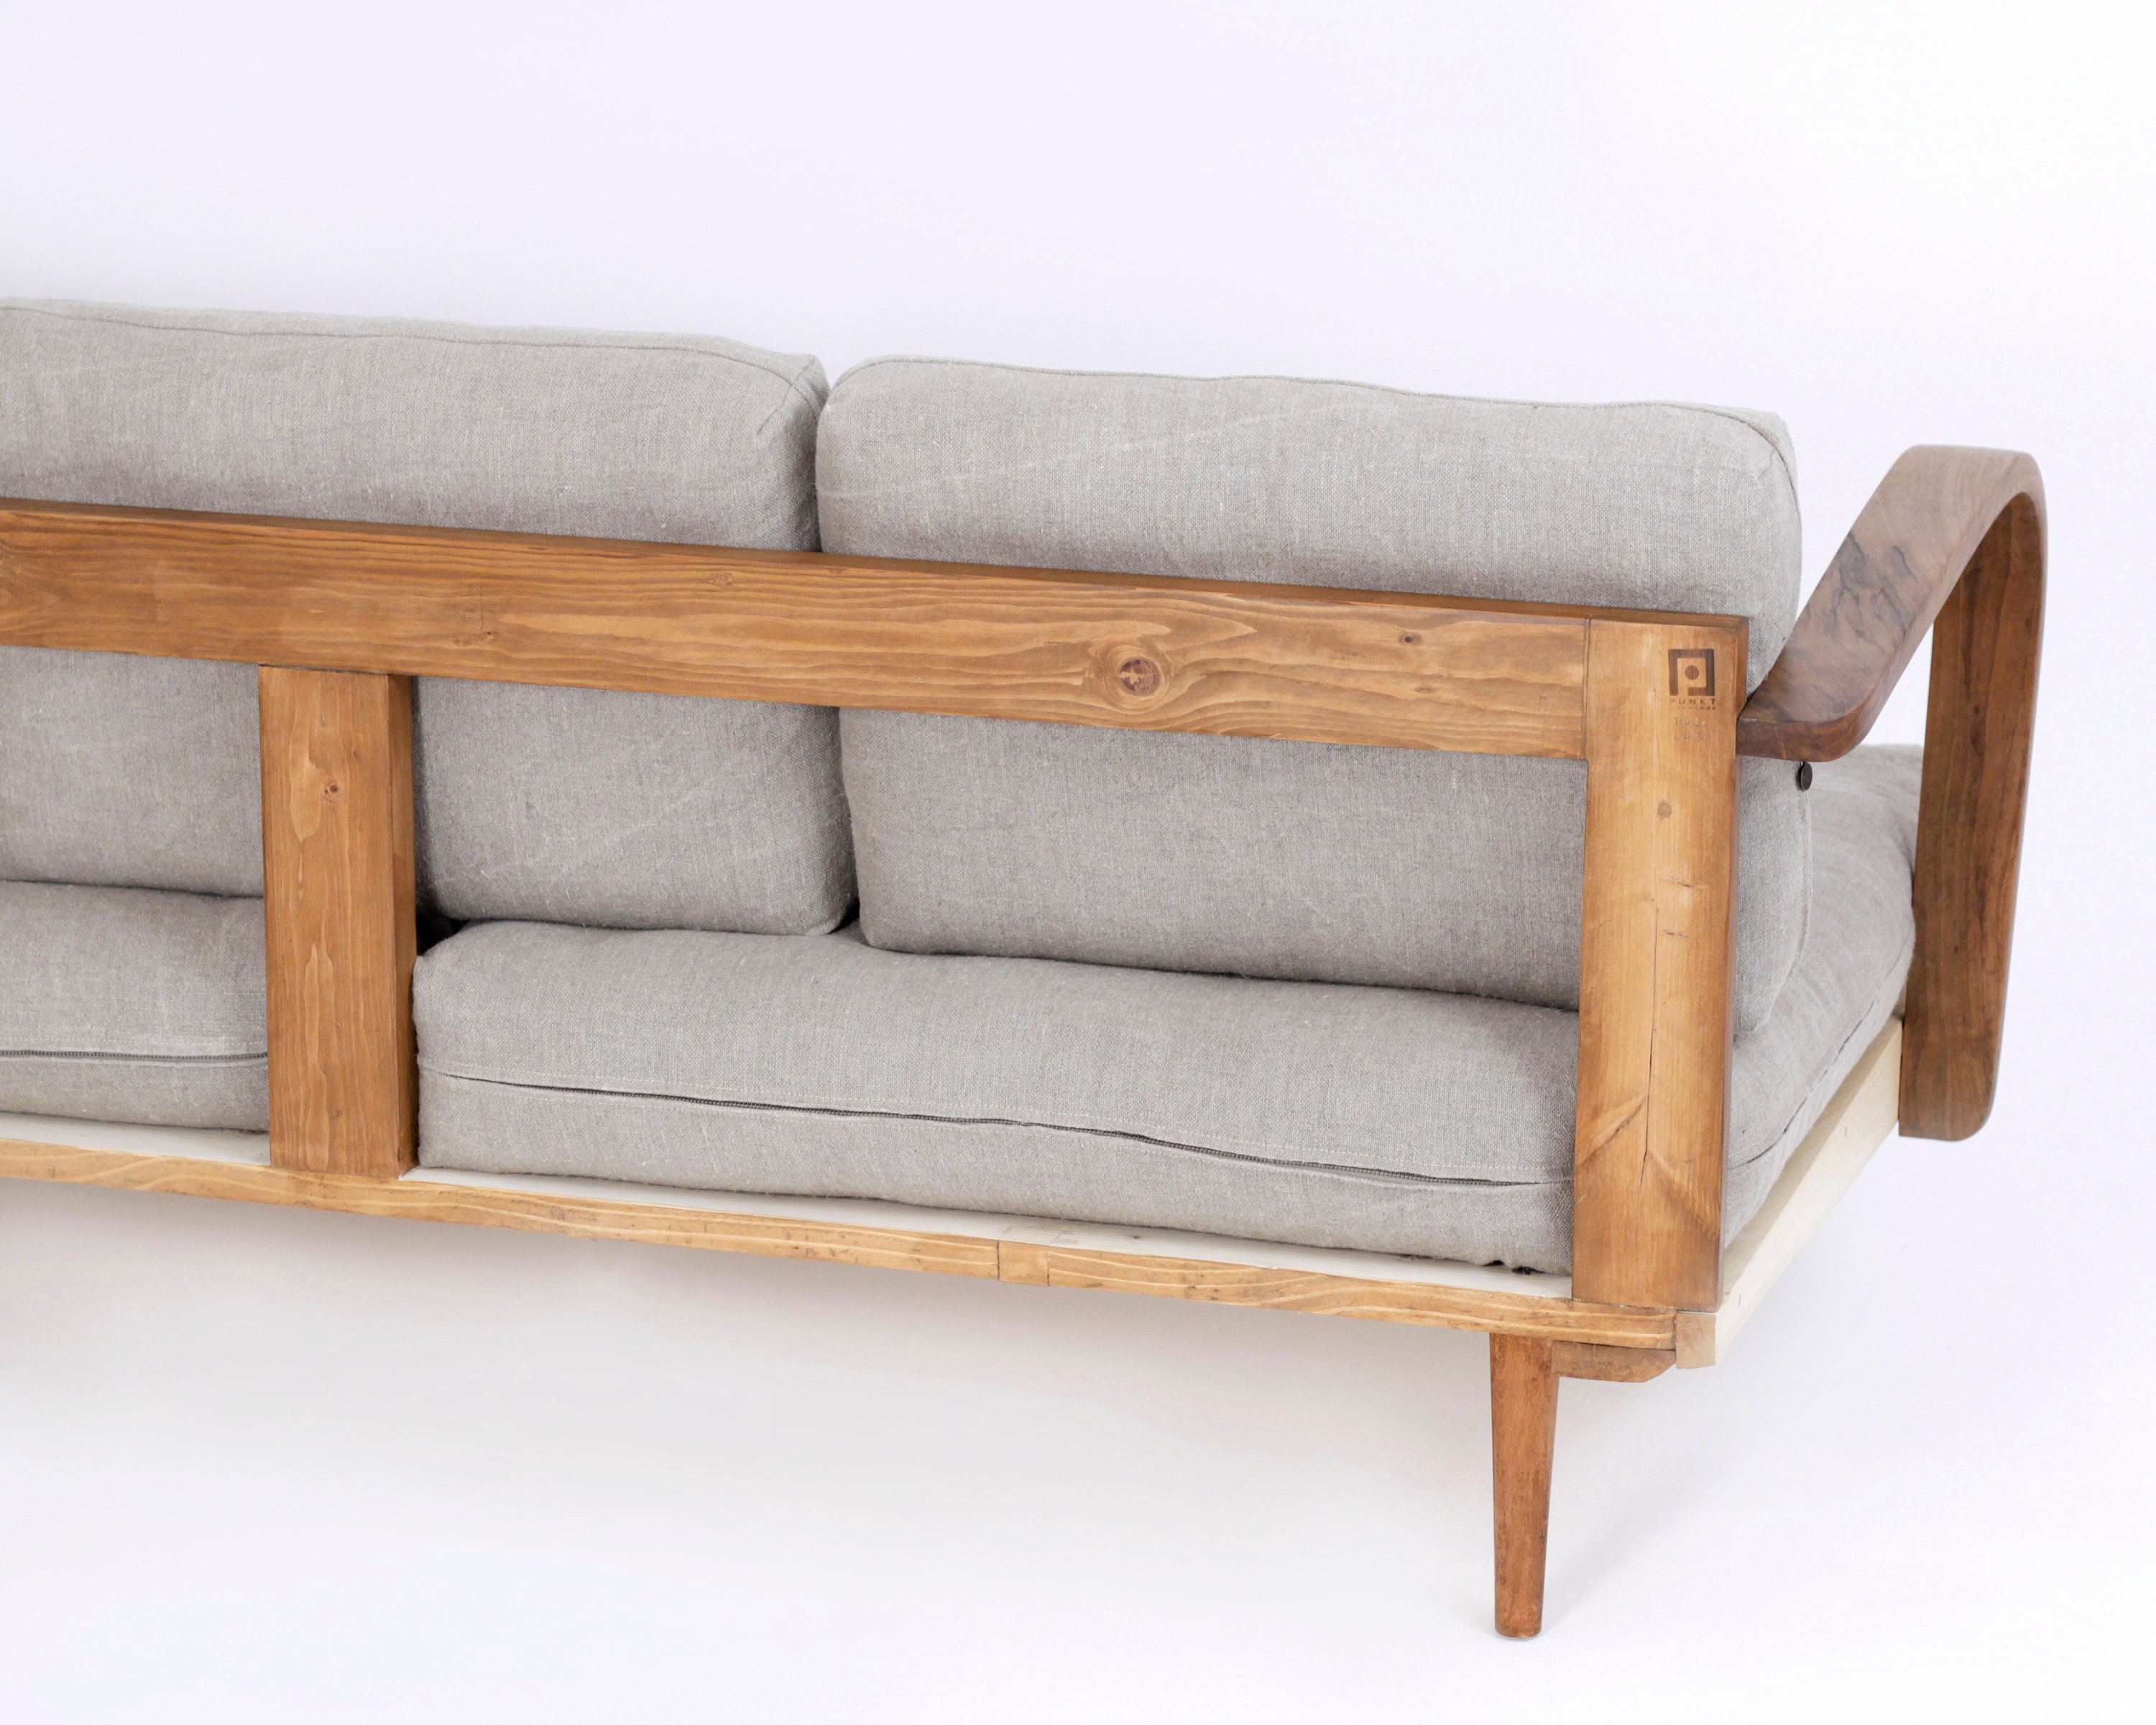 Wool Seat and Back Couch Cushions / All-natural, Free of Synthetics / Any  Custom Size on Request 